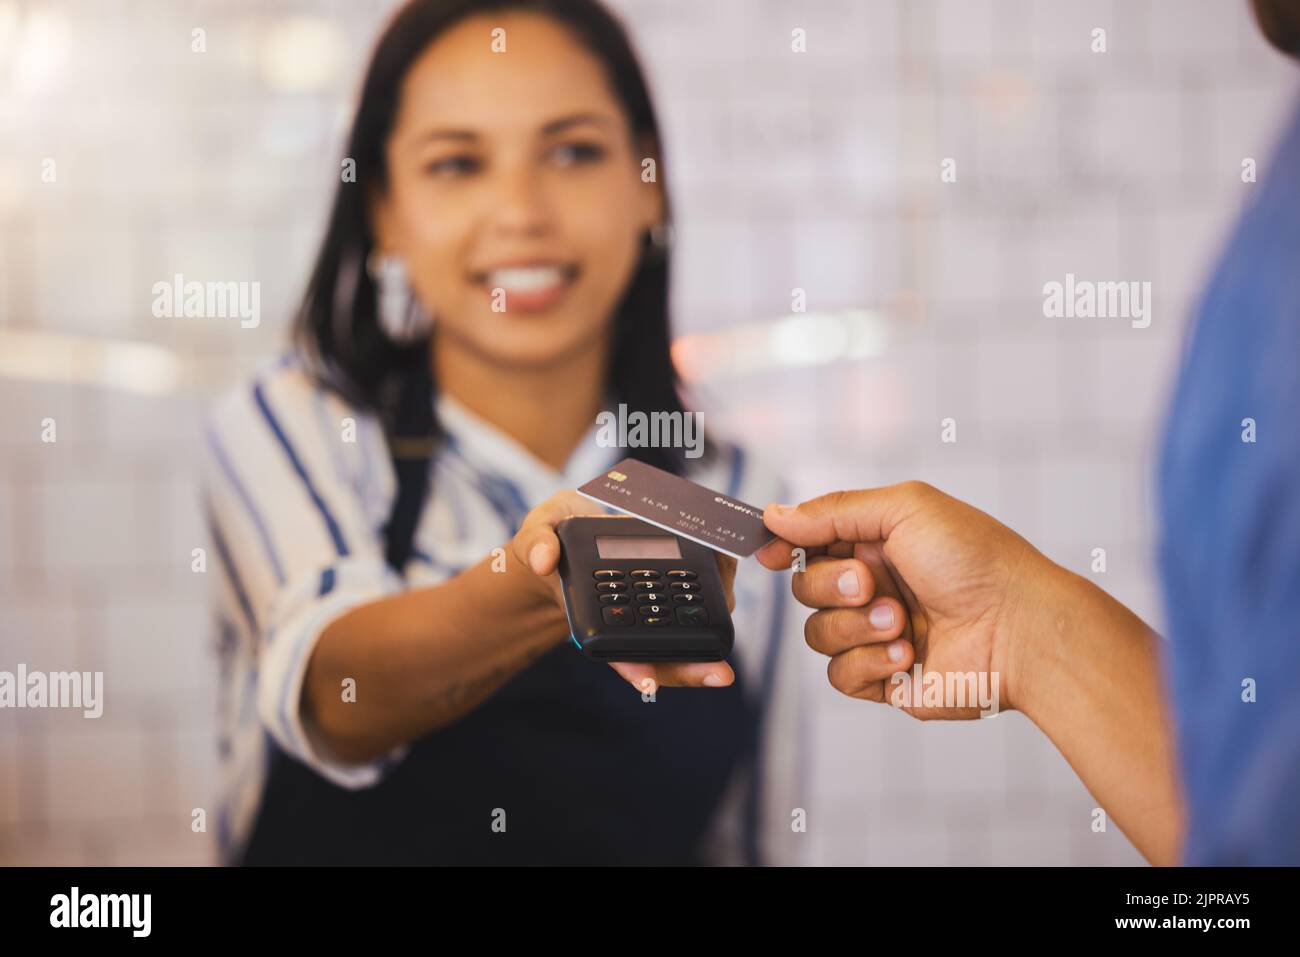 Credit card, payment and customer with an electronic reader in the hand of a cashier to process a fintech purchase or money spend. Consumer making a Stock Photo